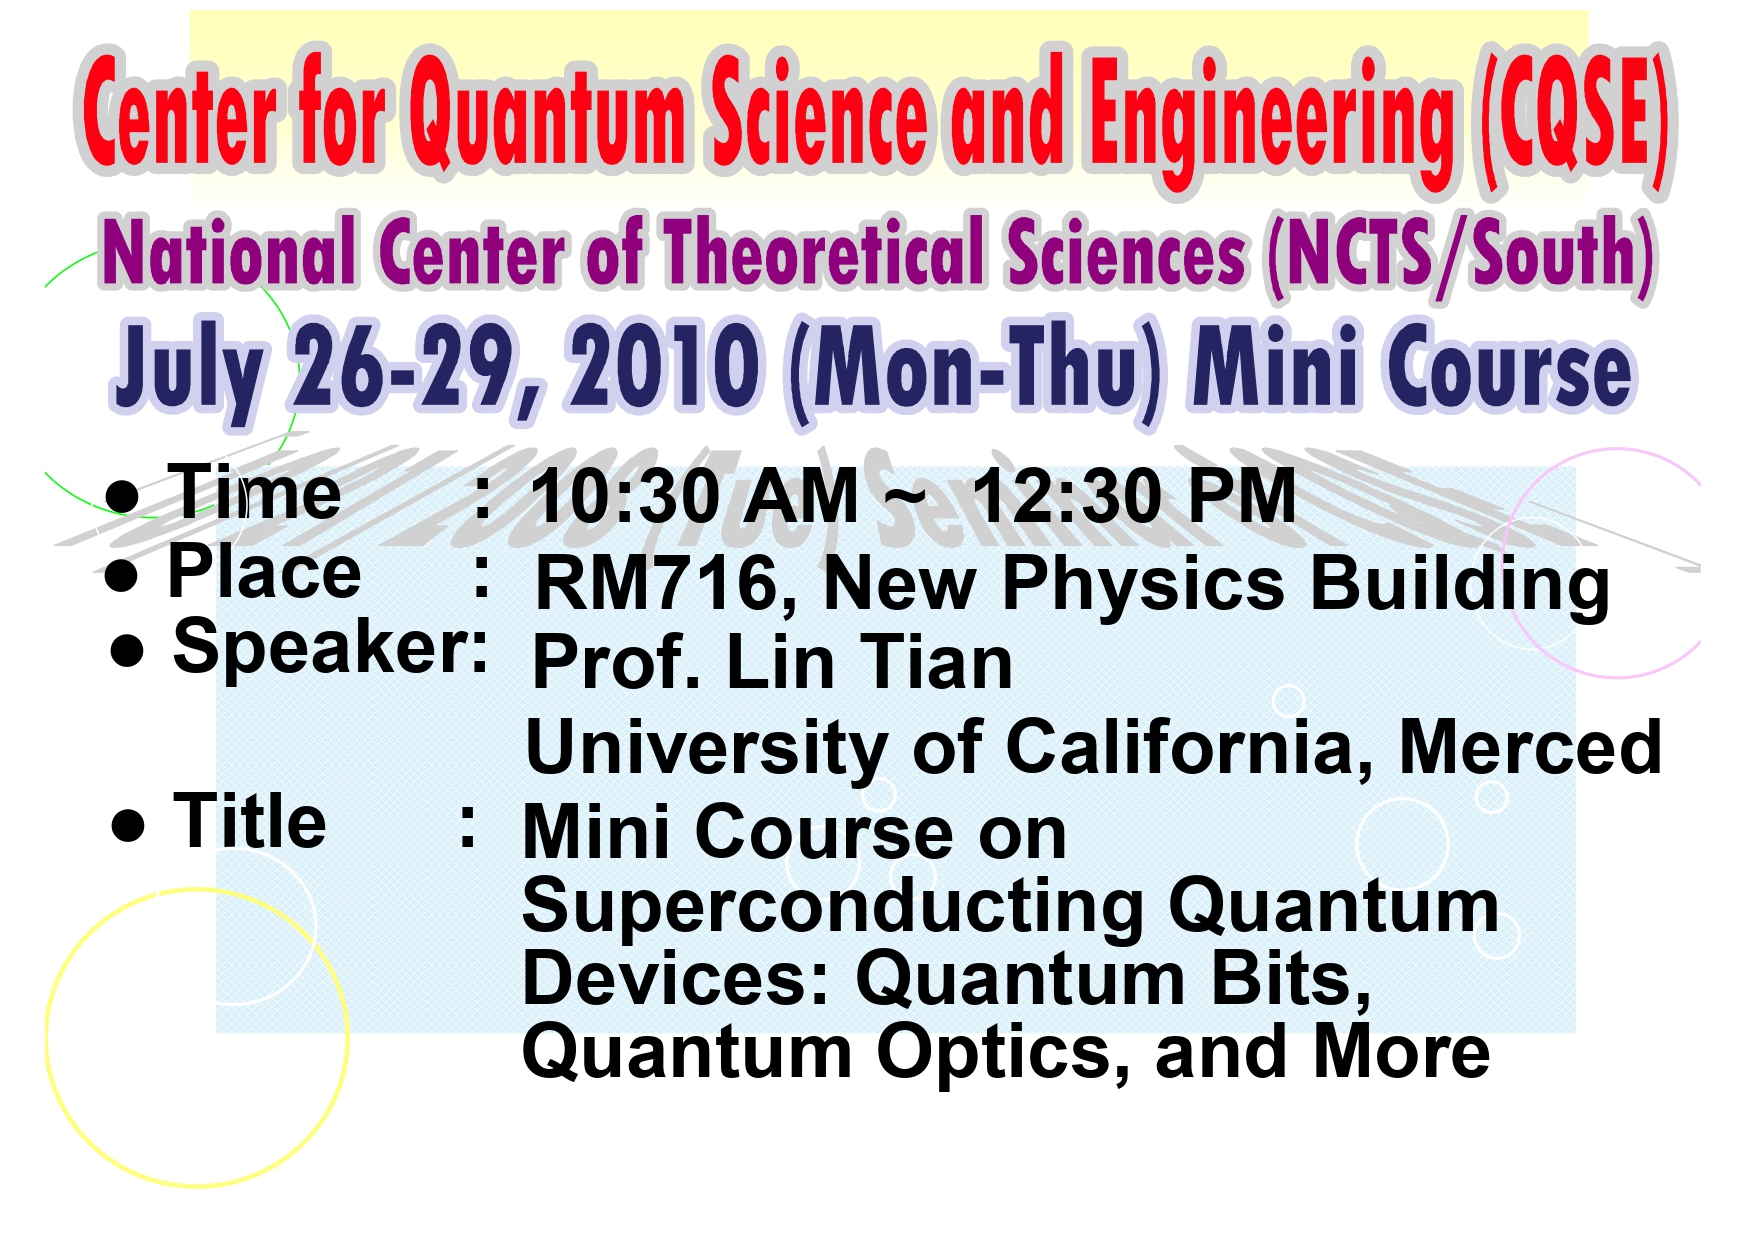 Mini-course of Center for Quantum Science and Engineering (CQSE) & NCTS (South)